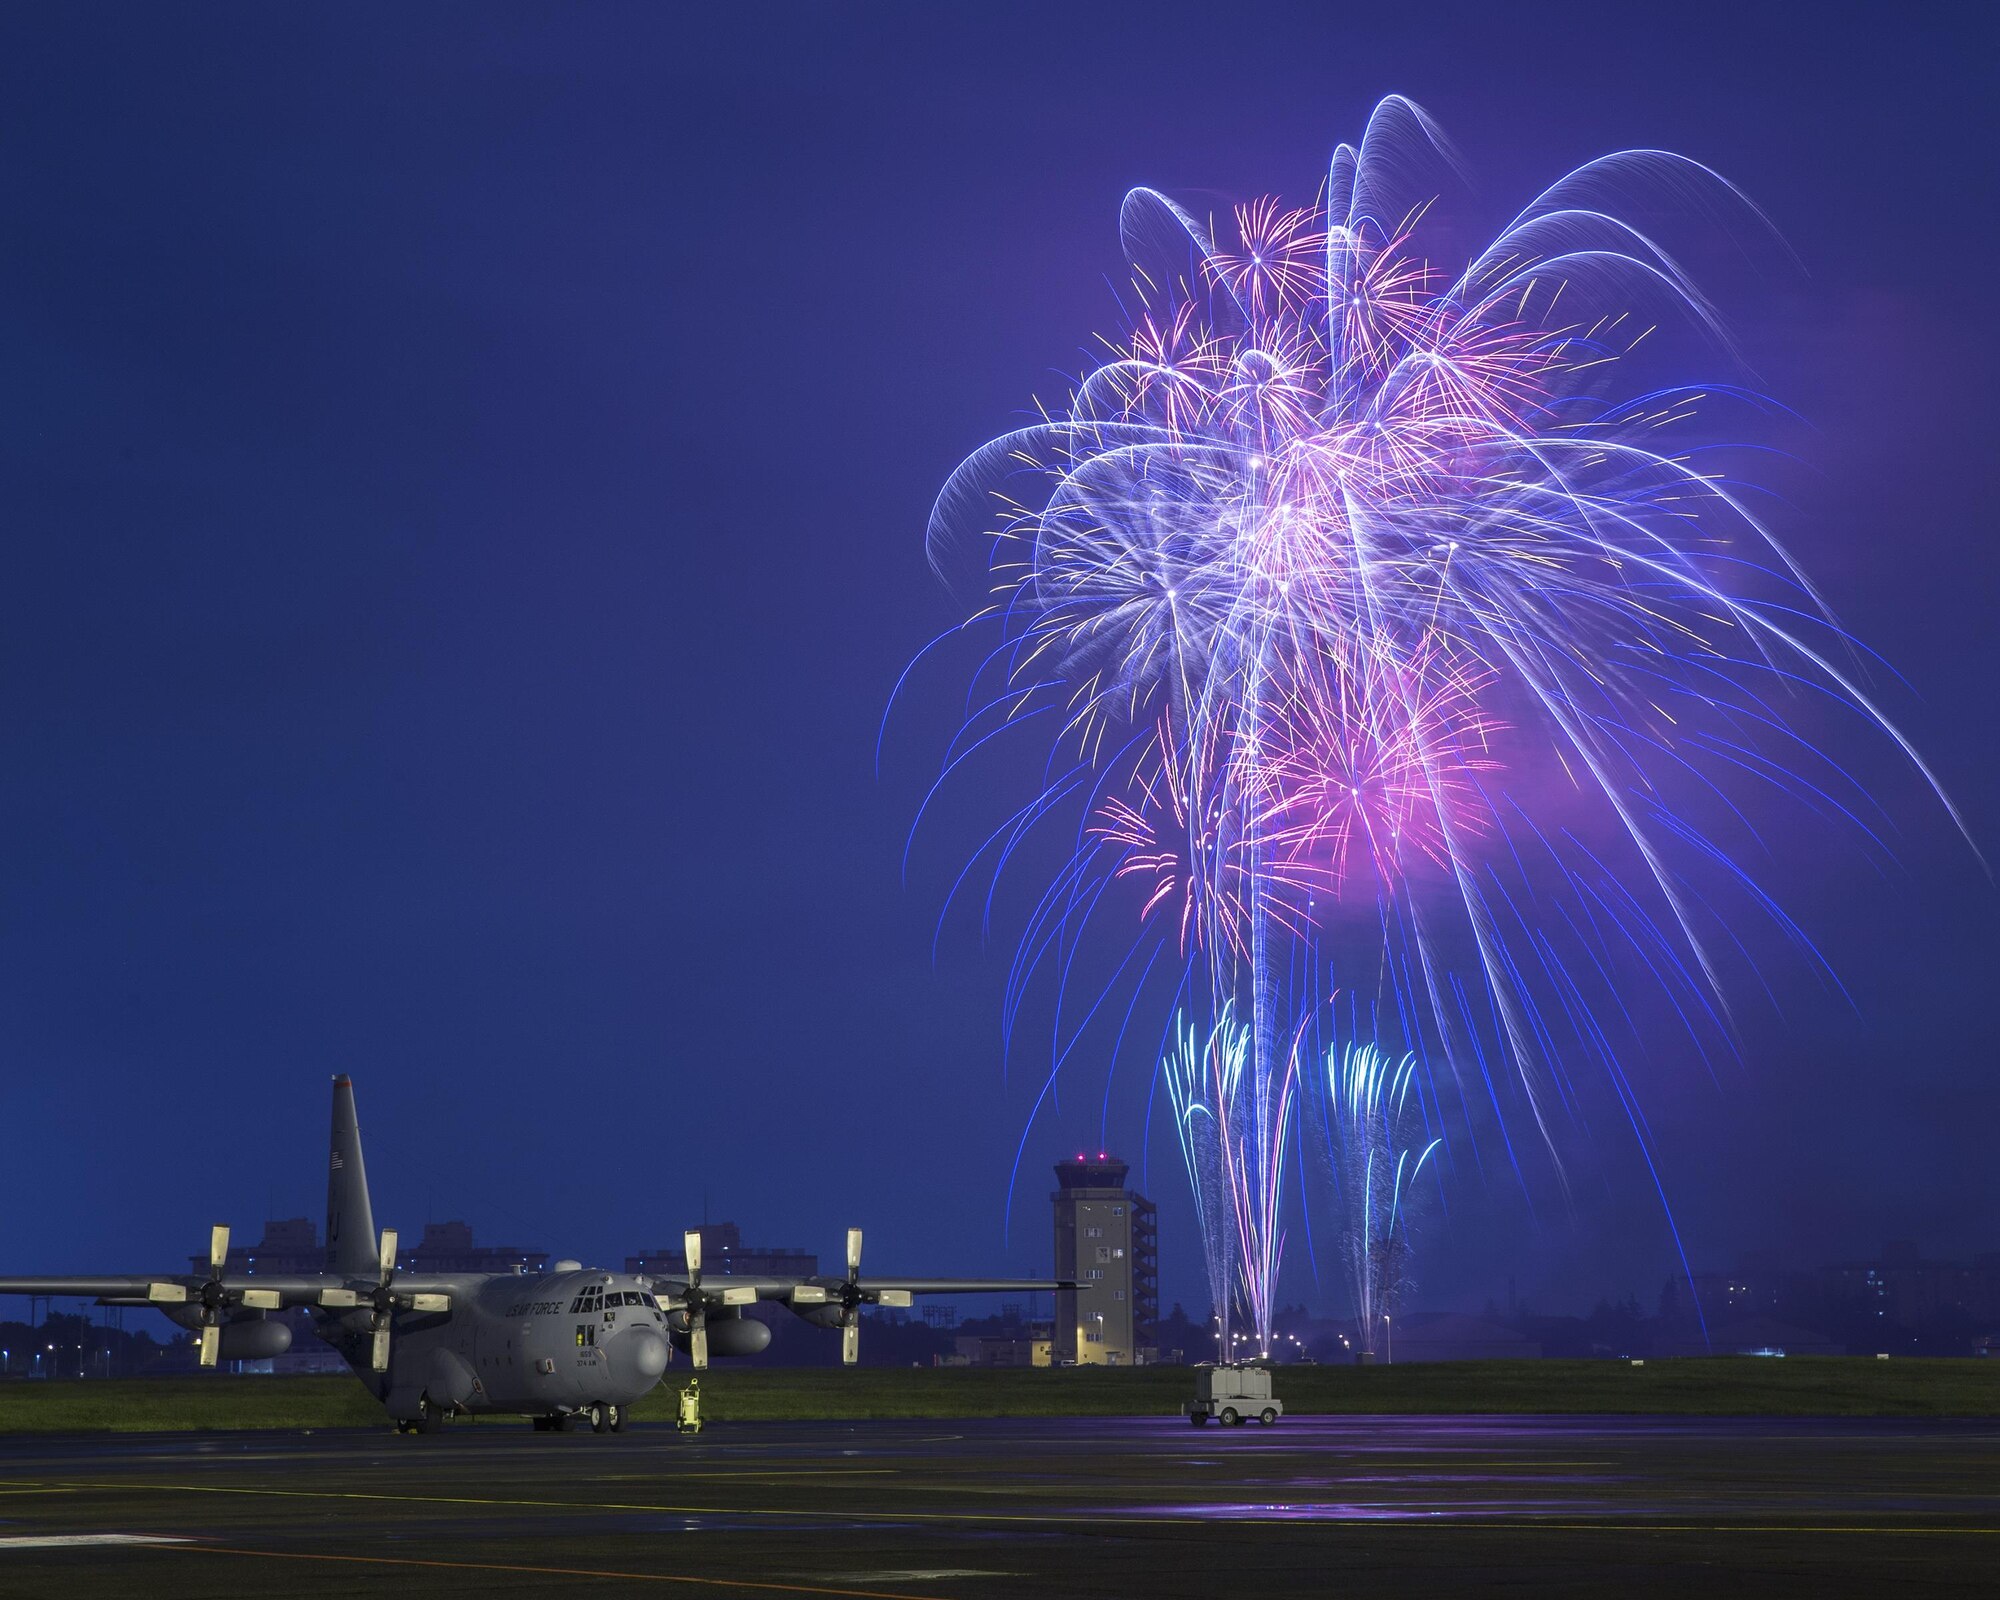 Fireworks explode behind a C-130 Hercules during the 2016 Friendship Festival at Yokota Air Base, Japan, Sept. 18, 2016. Over 135,000 visitors attended the festival designed to bolster the bilateral relationship shared between the United States and Japan. In addition to static displays and live music, the festival offered a variety of American and Japanese food. (U.S. Air Force photo by Yasuo Osakabe/Released)